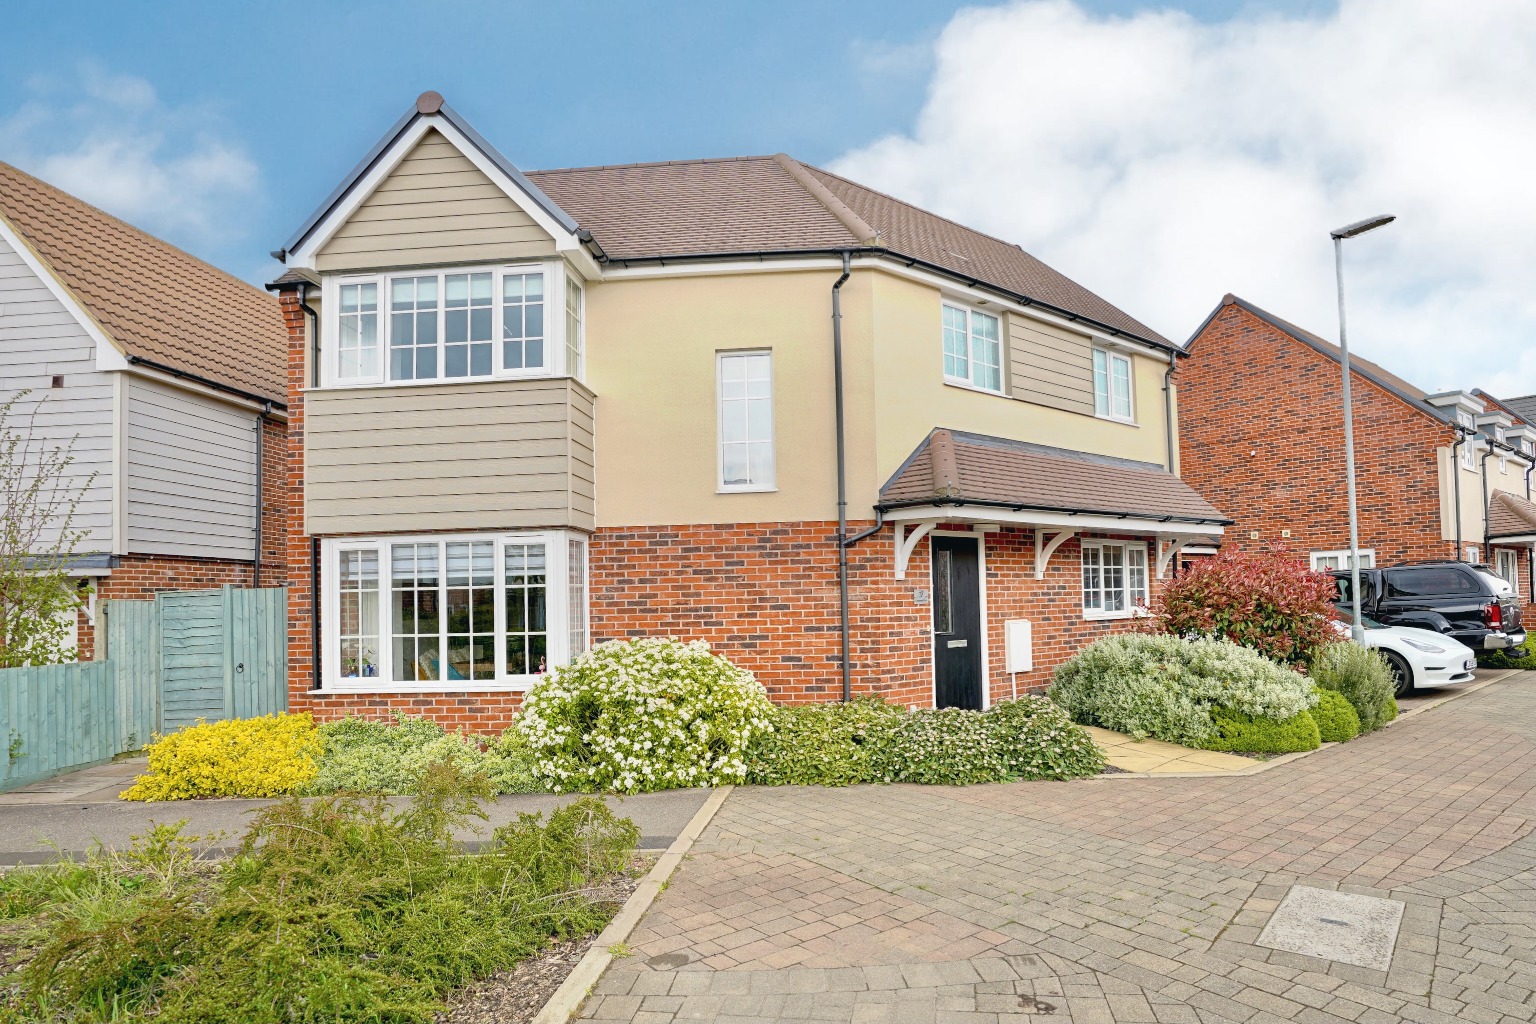 3 bed link detached house for sale in Harvest Drive, St. Neots  - Property Image 1